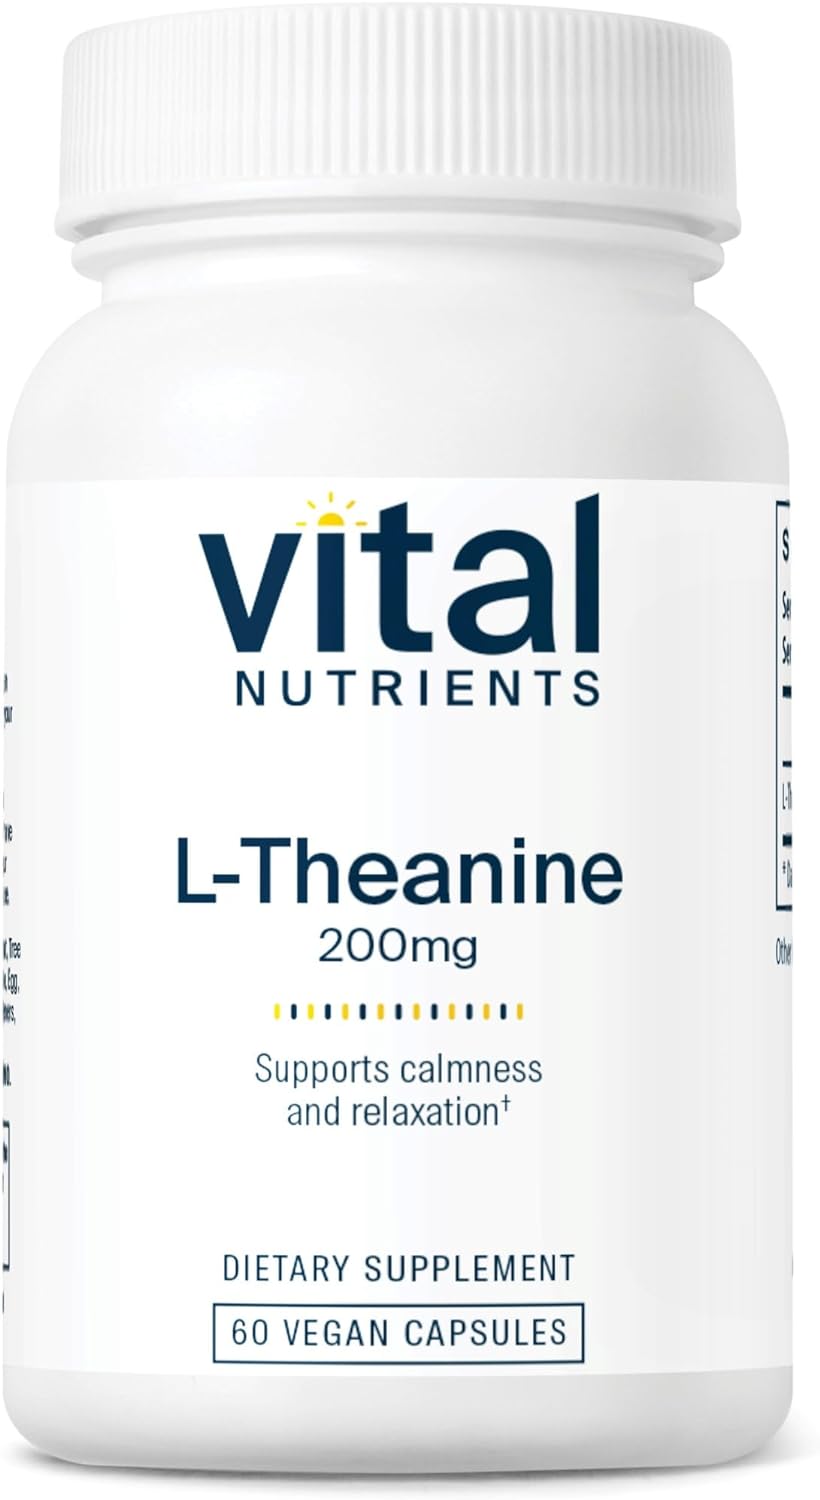 L-Theanine 200mg (60 capsules)